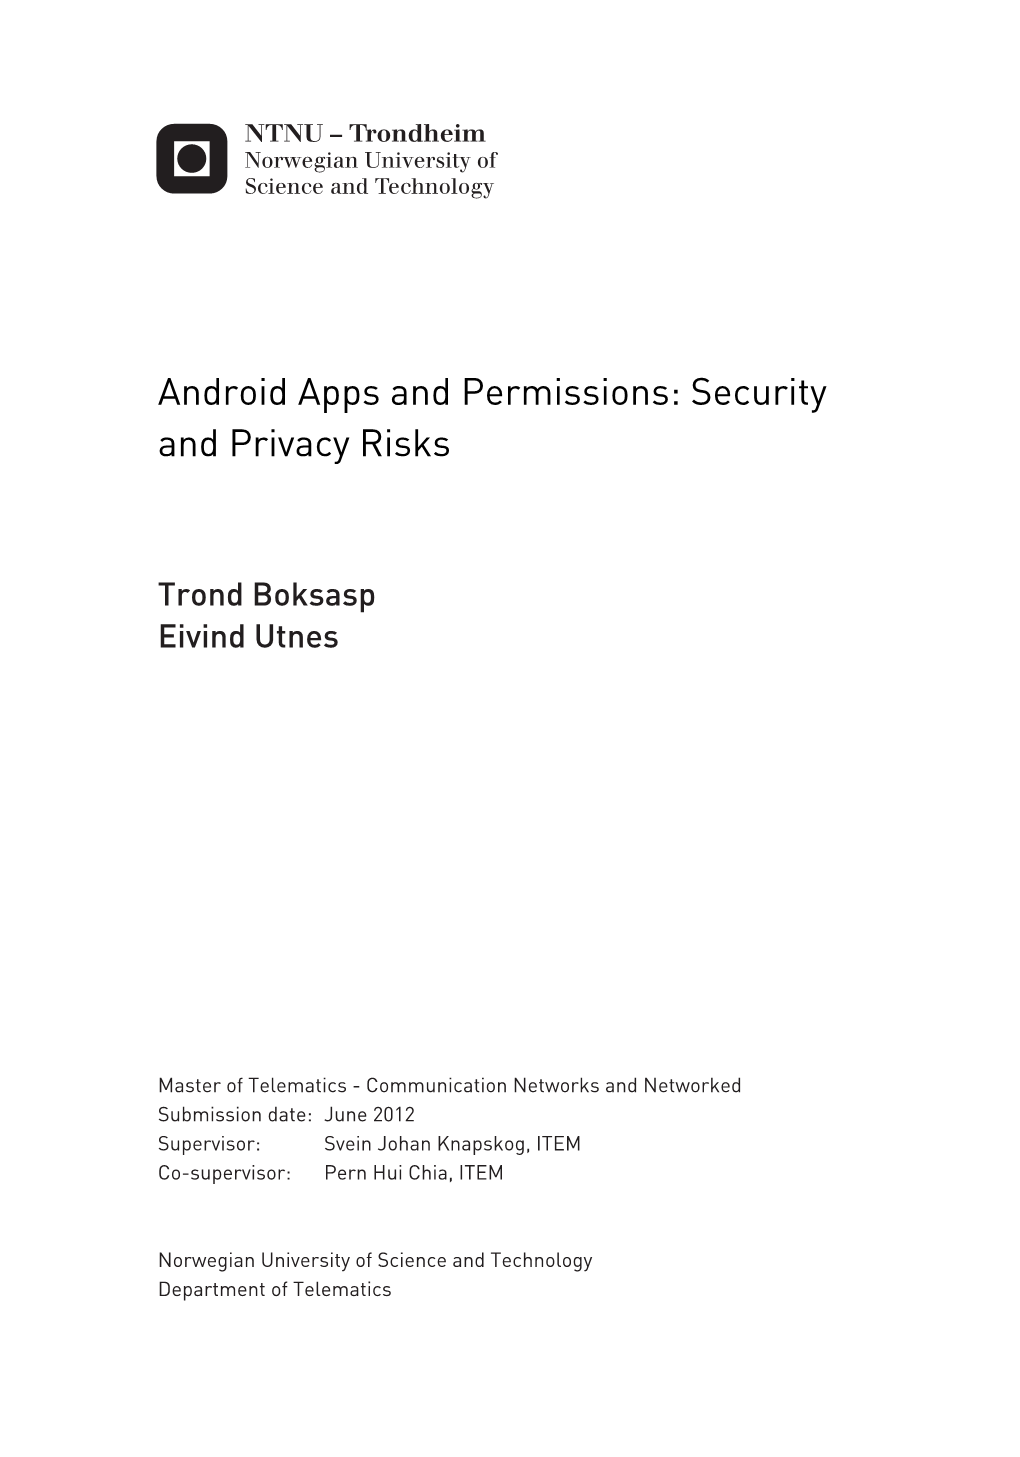 Android Apps and Permissions: Security and Privacy Risks